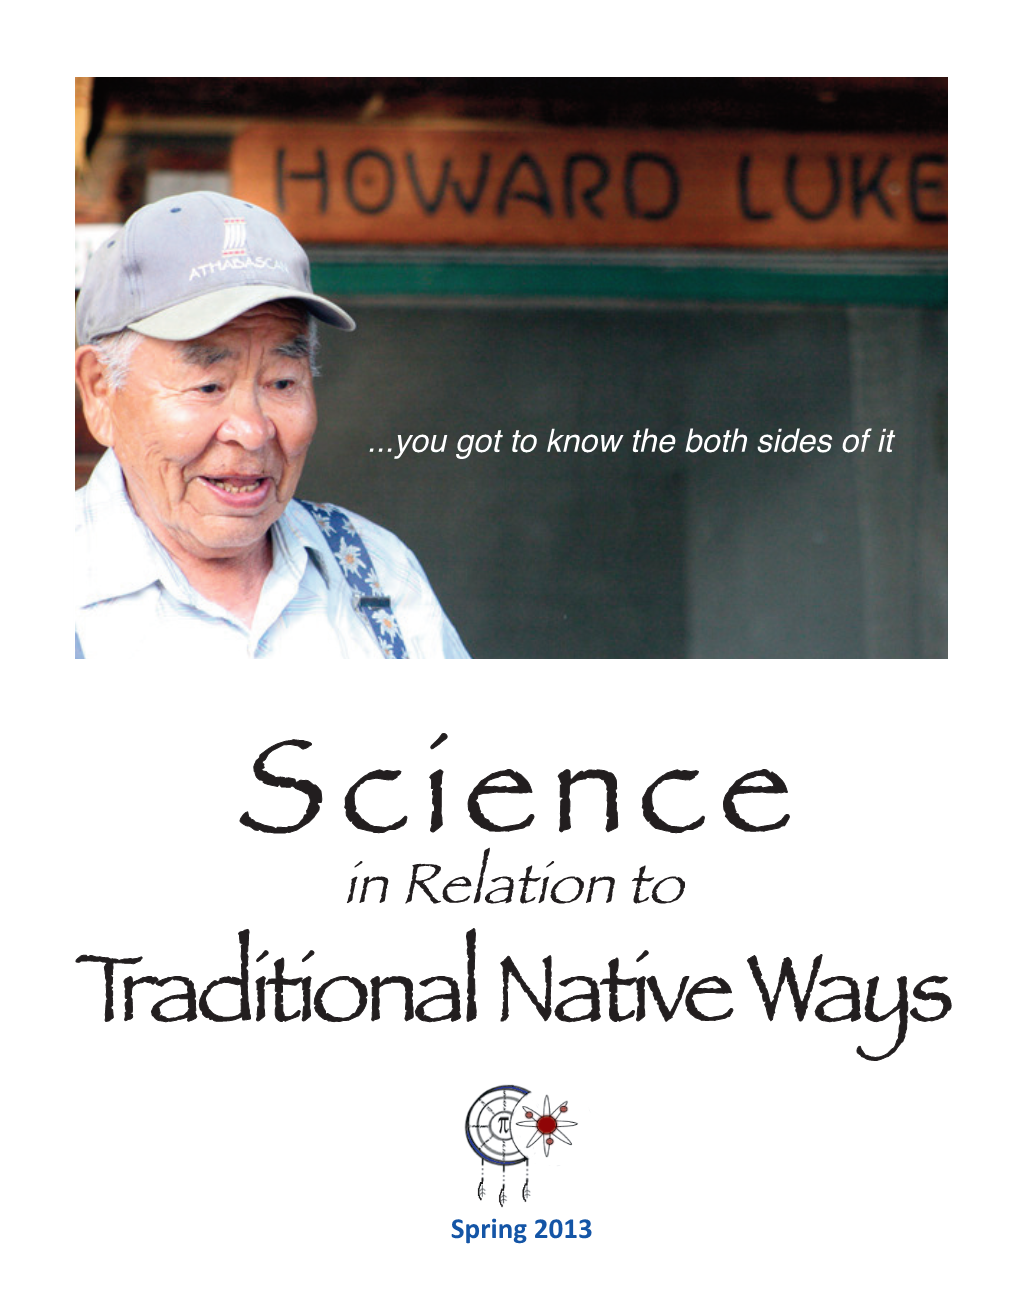 Science in Relation to Traditional Native Ways of Knowing